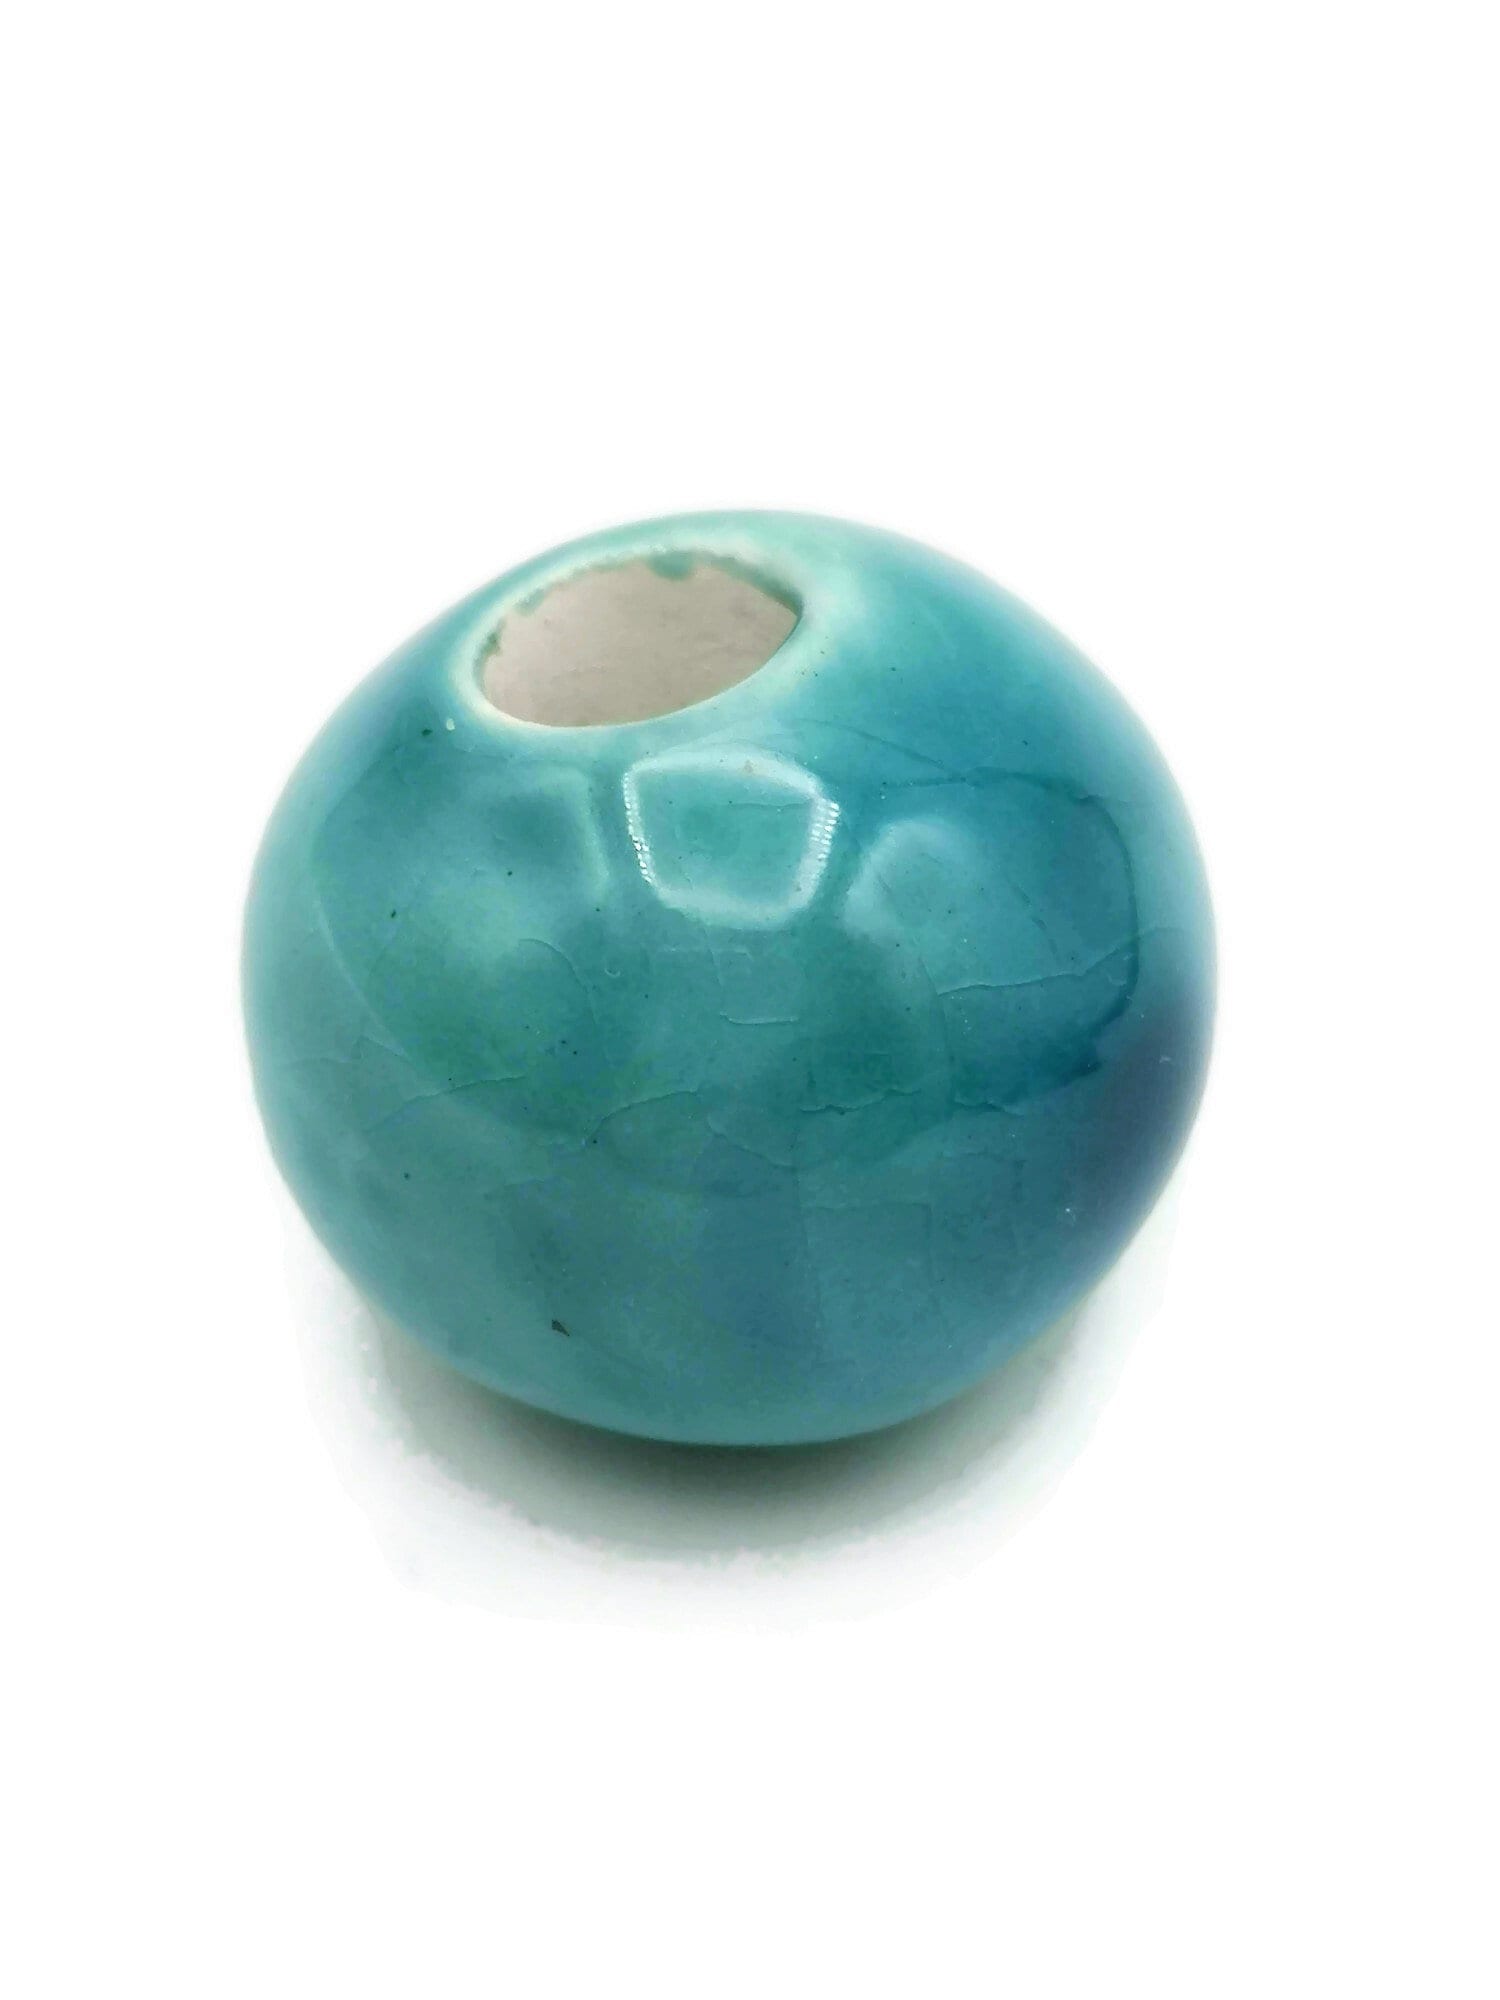 1pc Blue Handmade Ceramic Macrame Bead Large Hole, Unique Clay Beads for  Jewelry Making Supplies, Extra Large Focal Point Beads for Crafts 